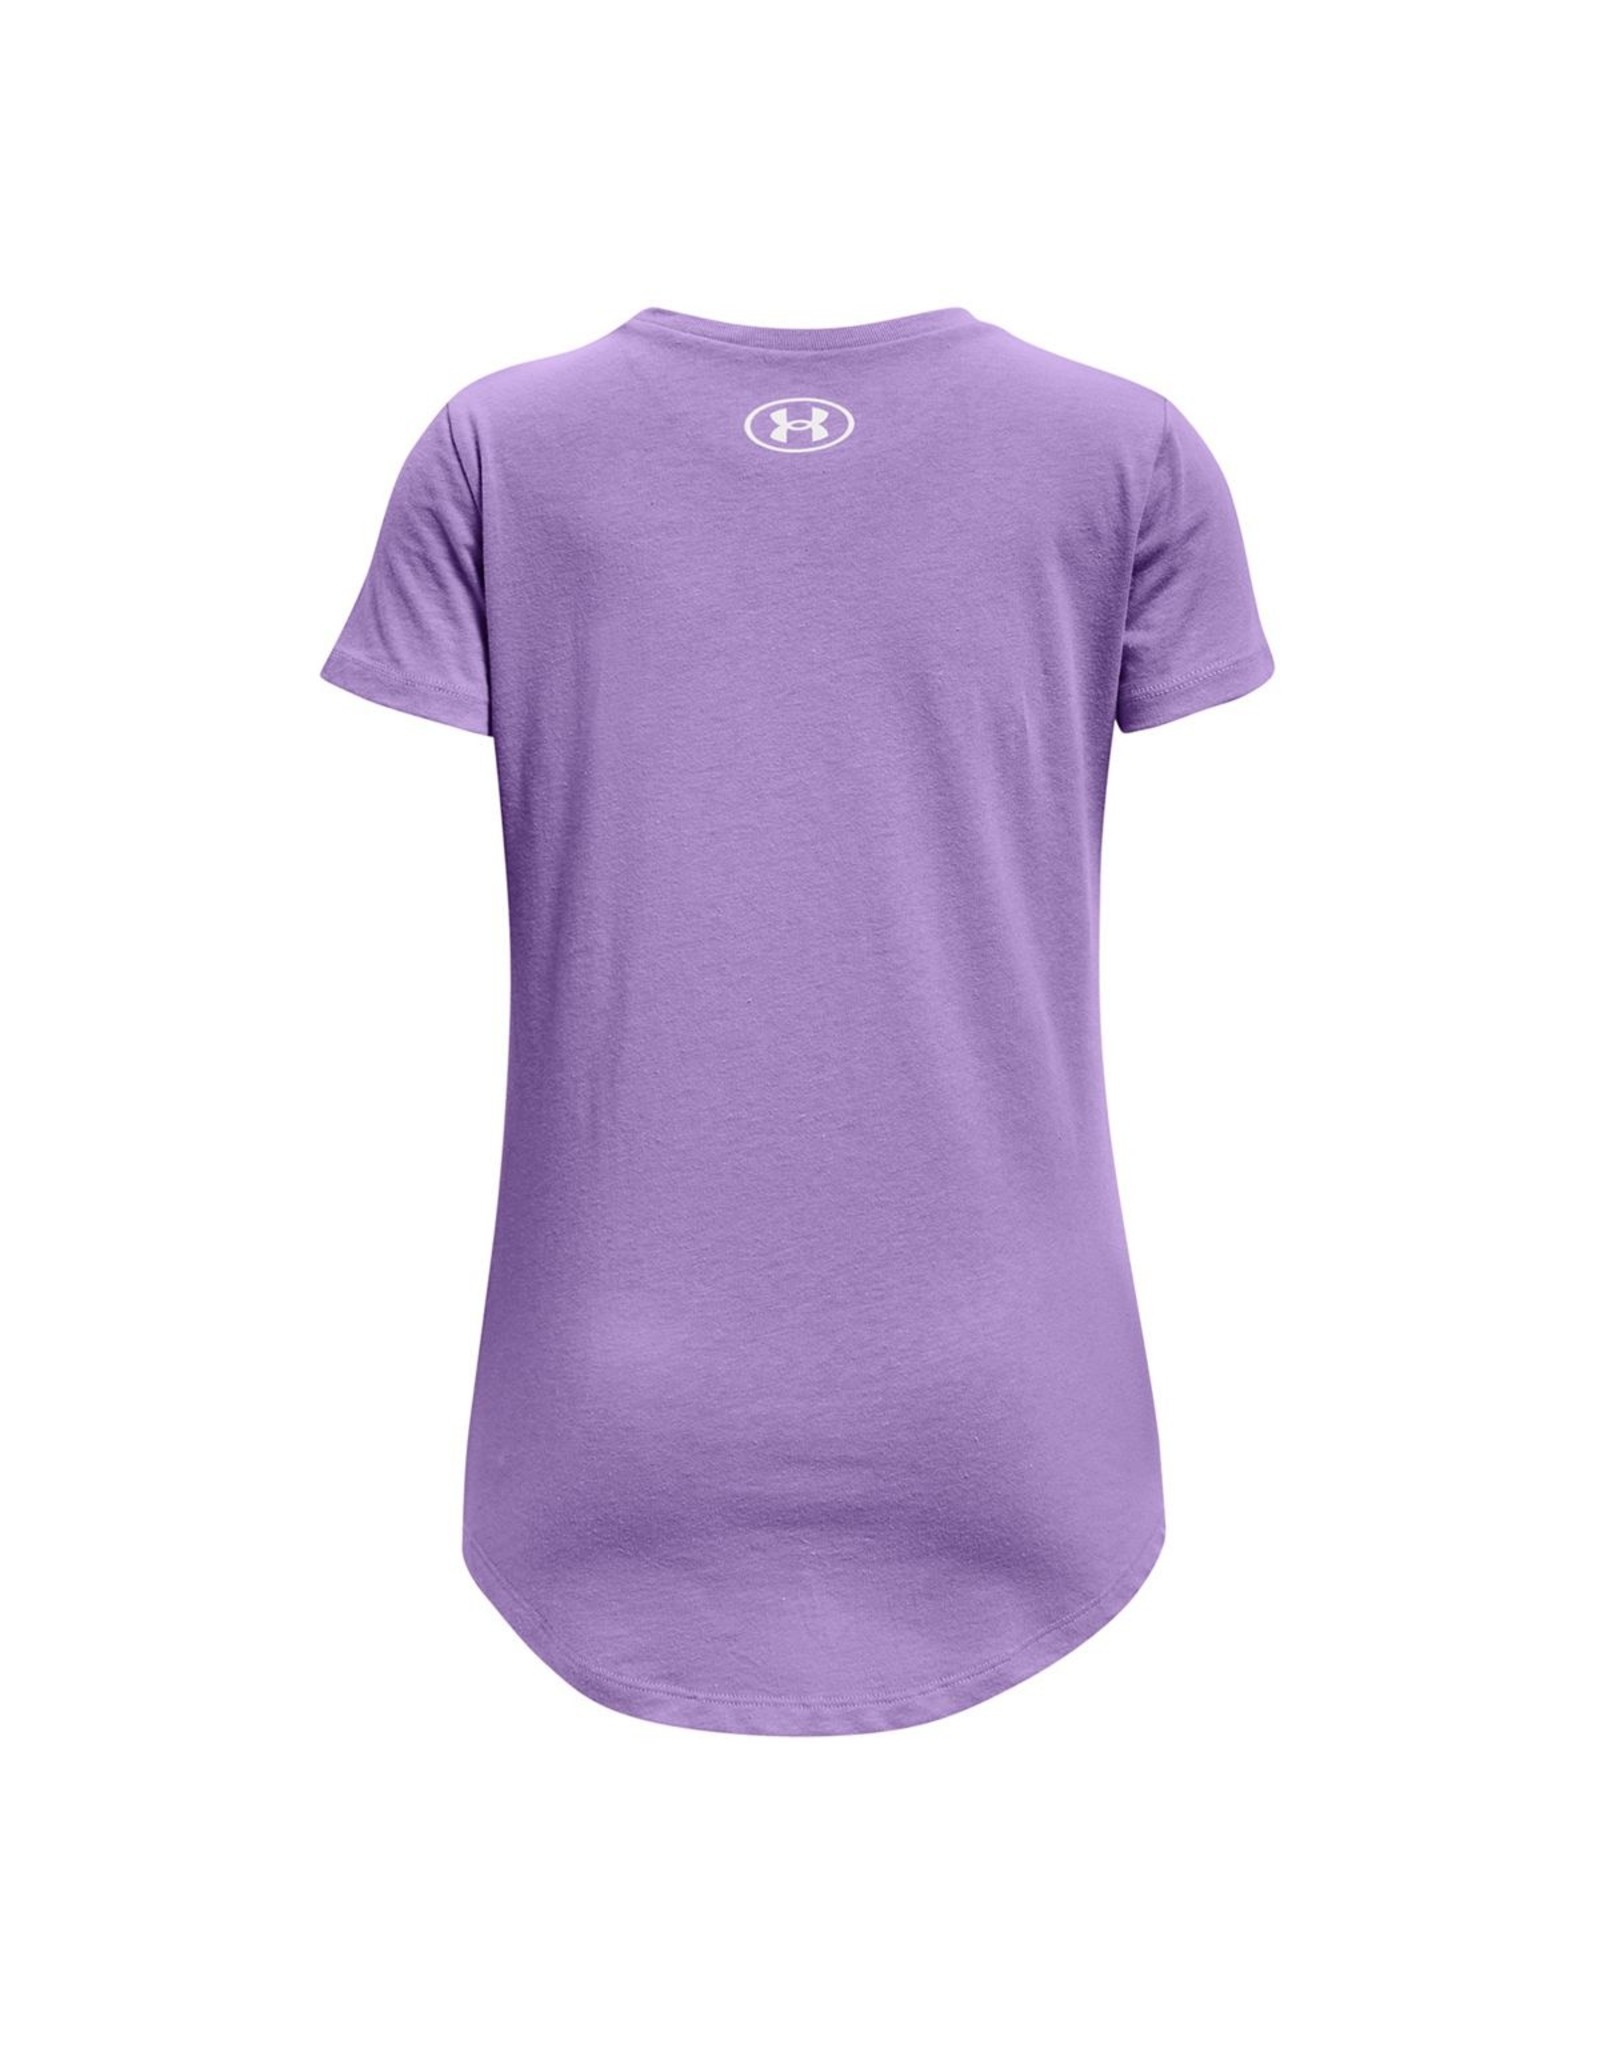 Under Armour Girls Sky Is Not The Limit Tee - Blanton-Caldwell